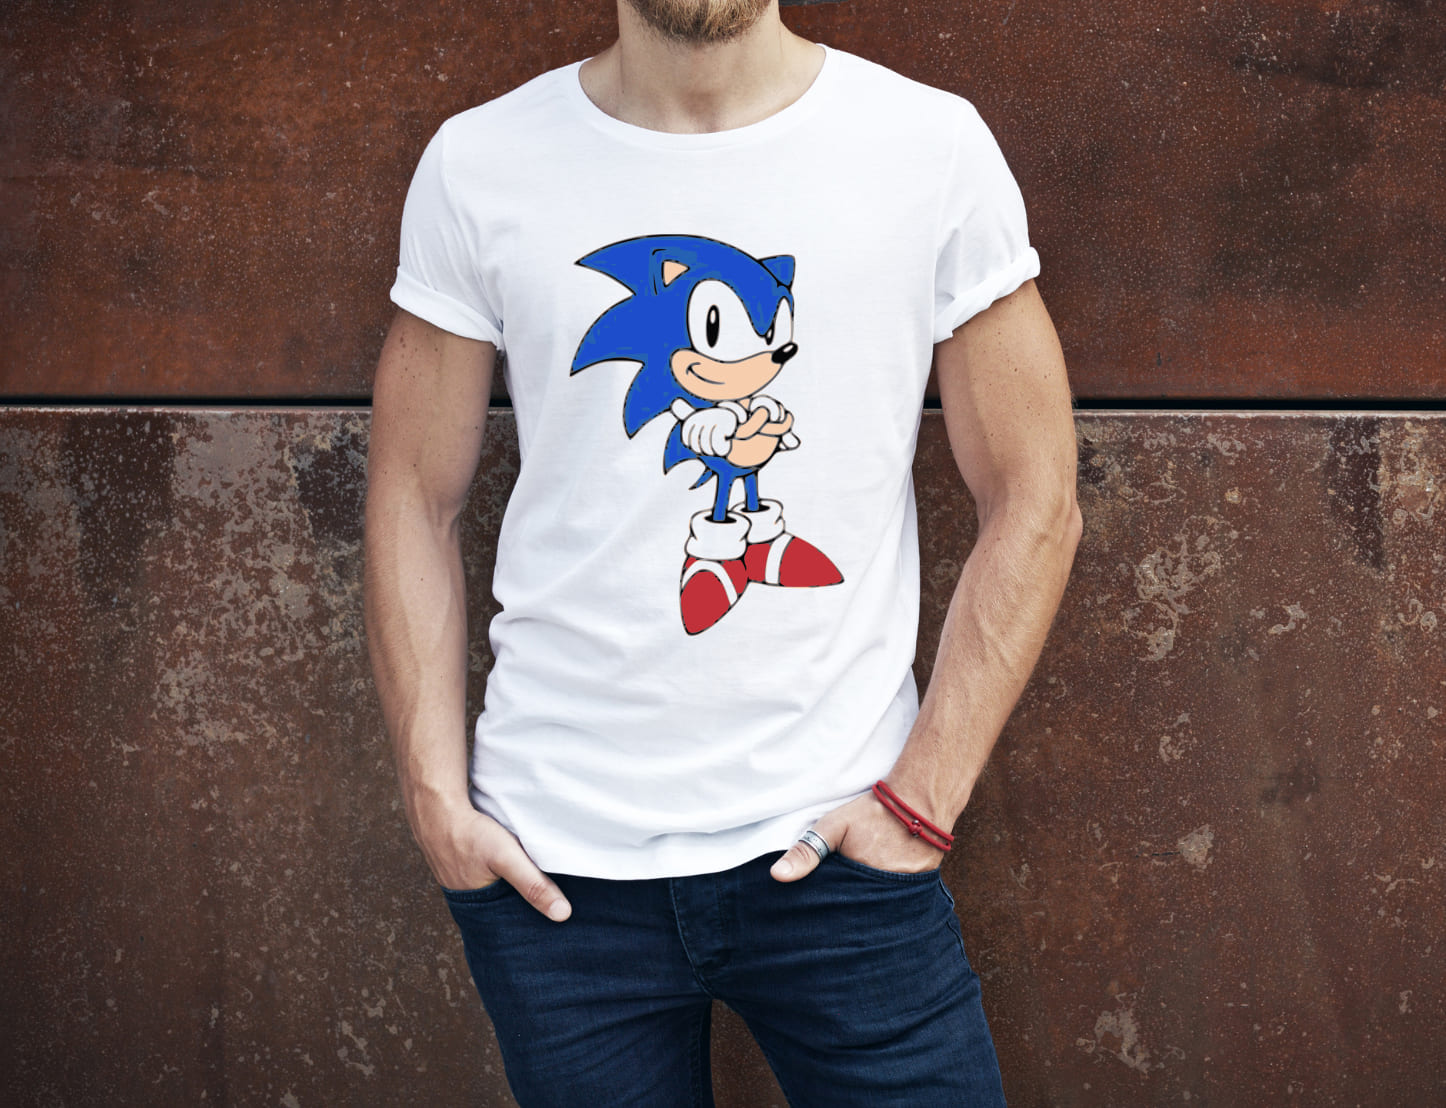 Interesting color Sonic on the classic t-shirt.